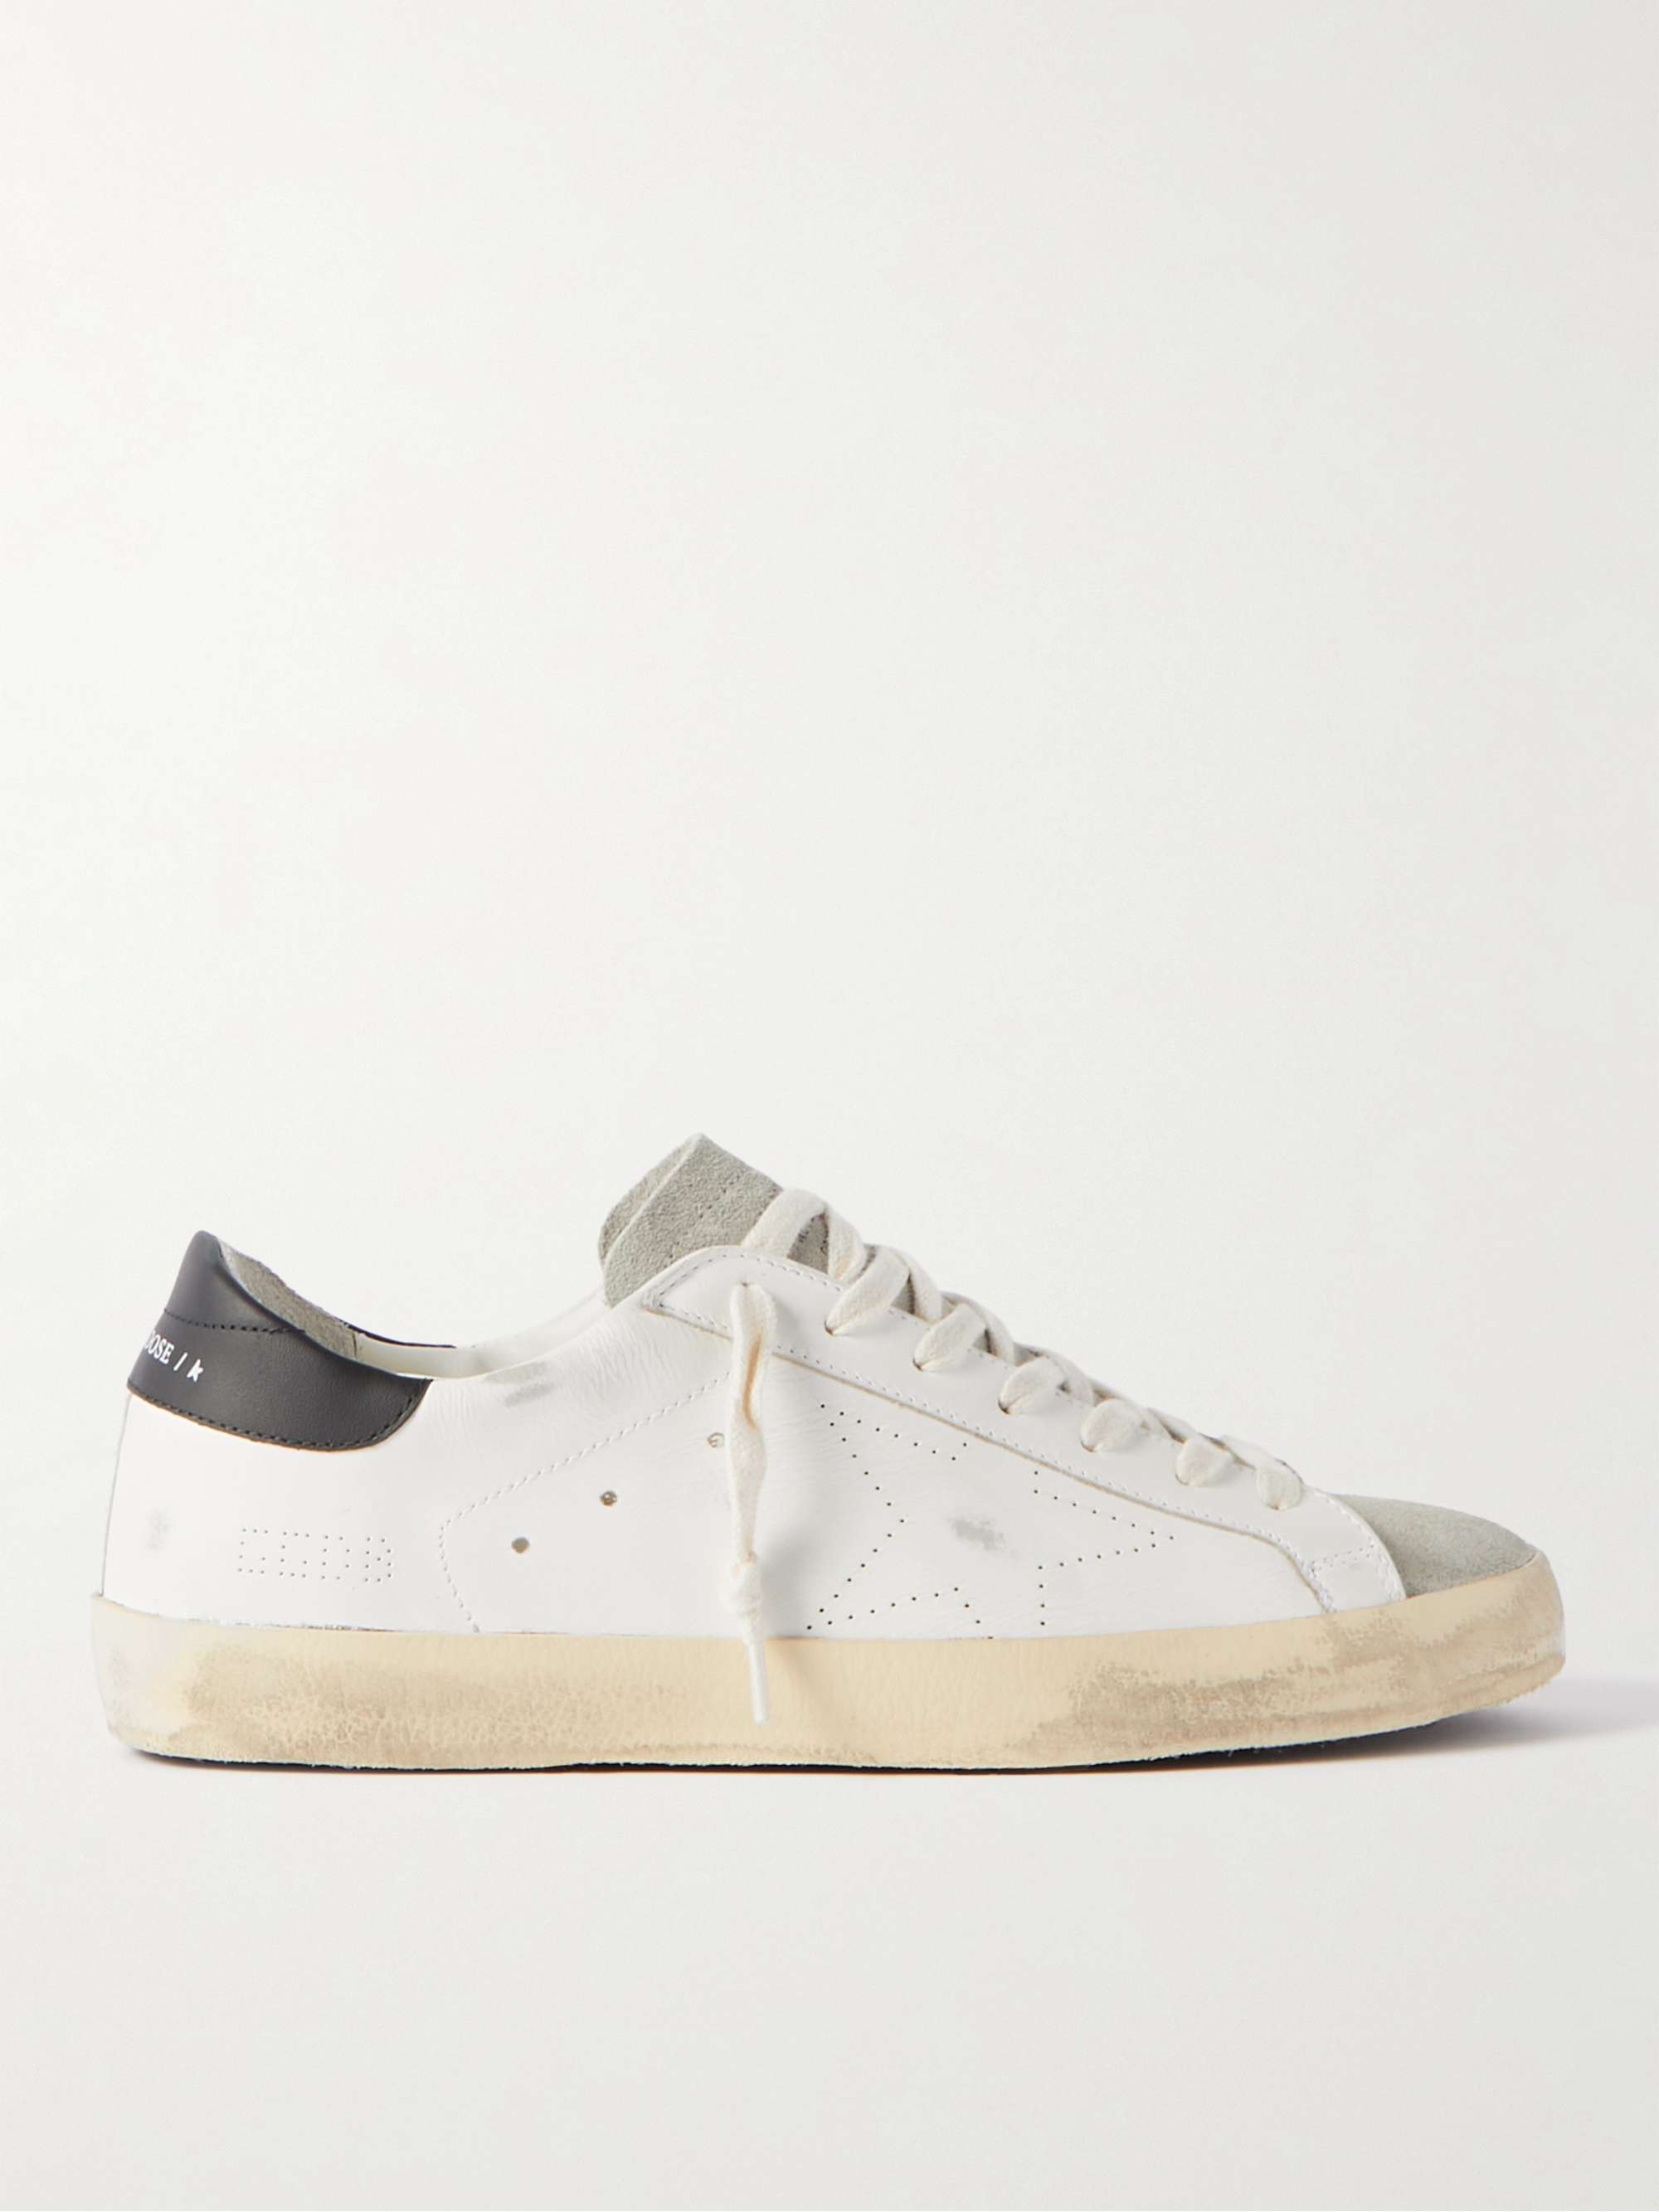 GOLDEN GOOSE Superstar Distressed Leather and Suede Sneakers | MR PORTER